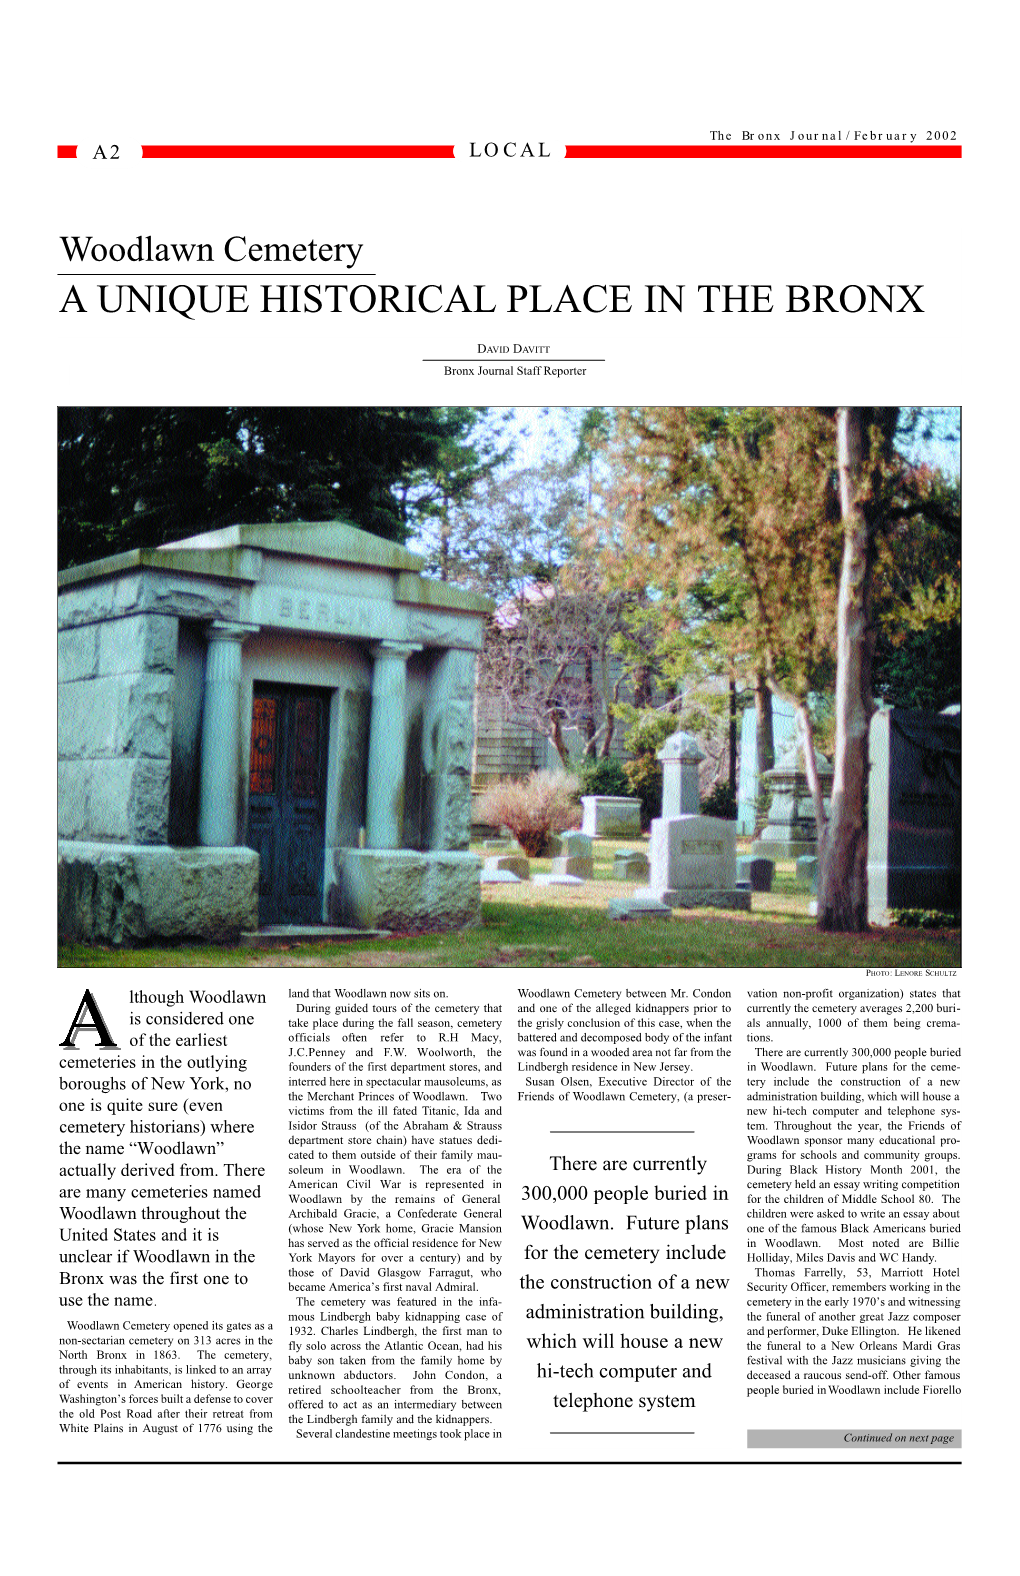 Woodlawn Cemetery a UNIQUE HISTORICAL PLACE in the BRONX